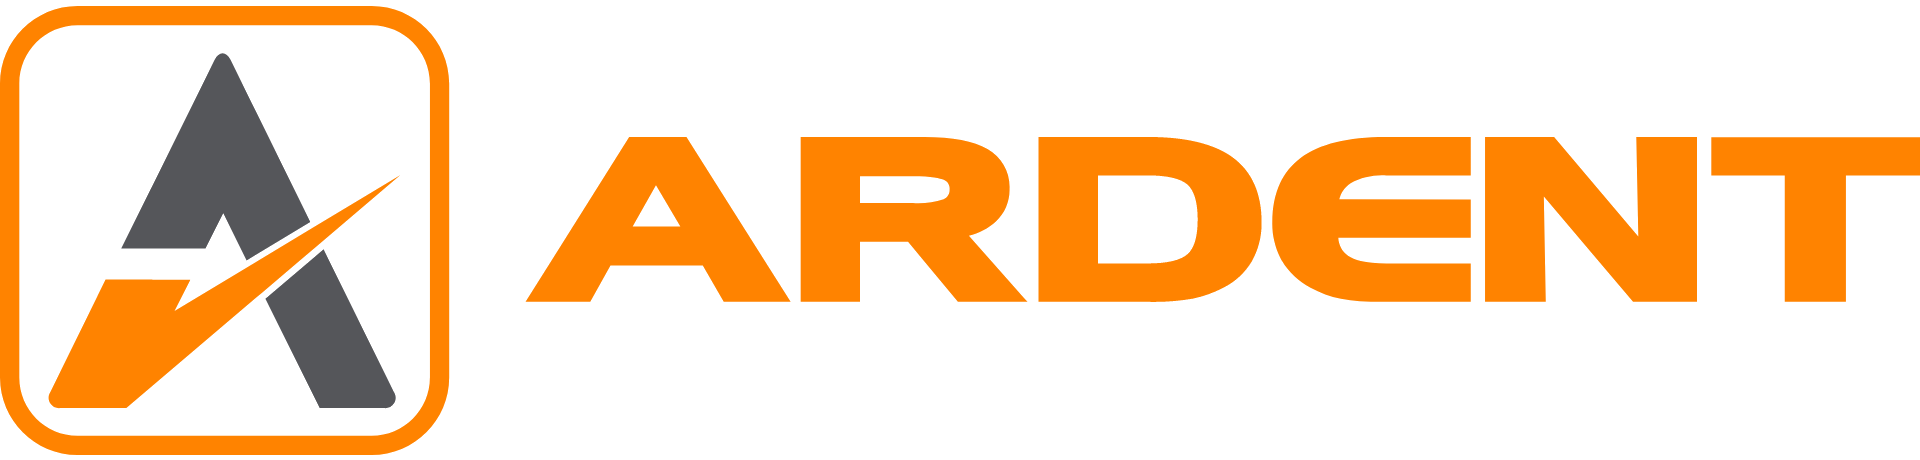 Ardent Hire